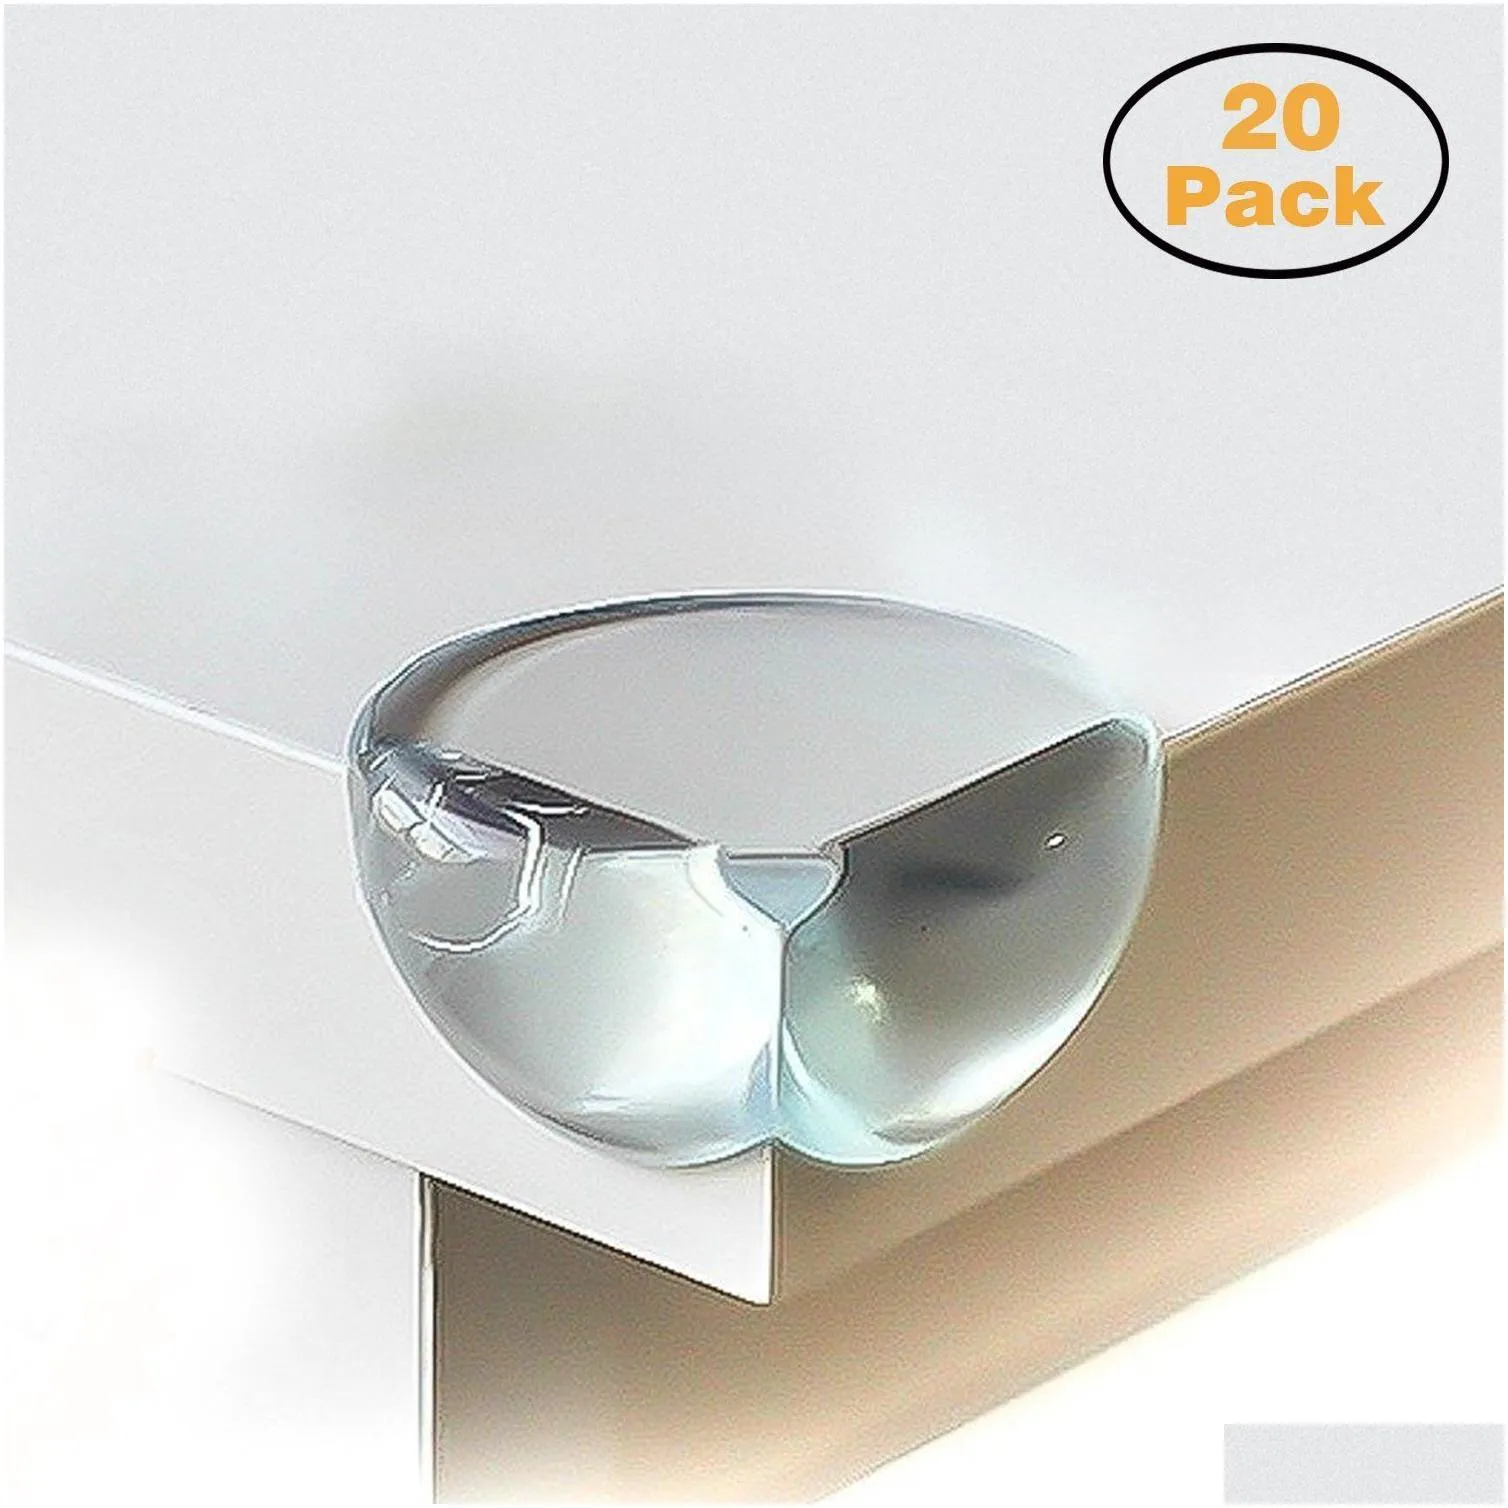 safety corner protectors for kids (20 pcs), quality clear soft large table edge bumper guards for child baby proofing